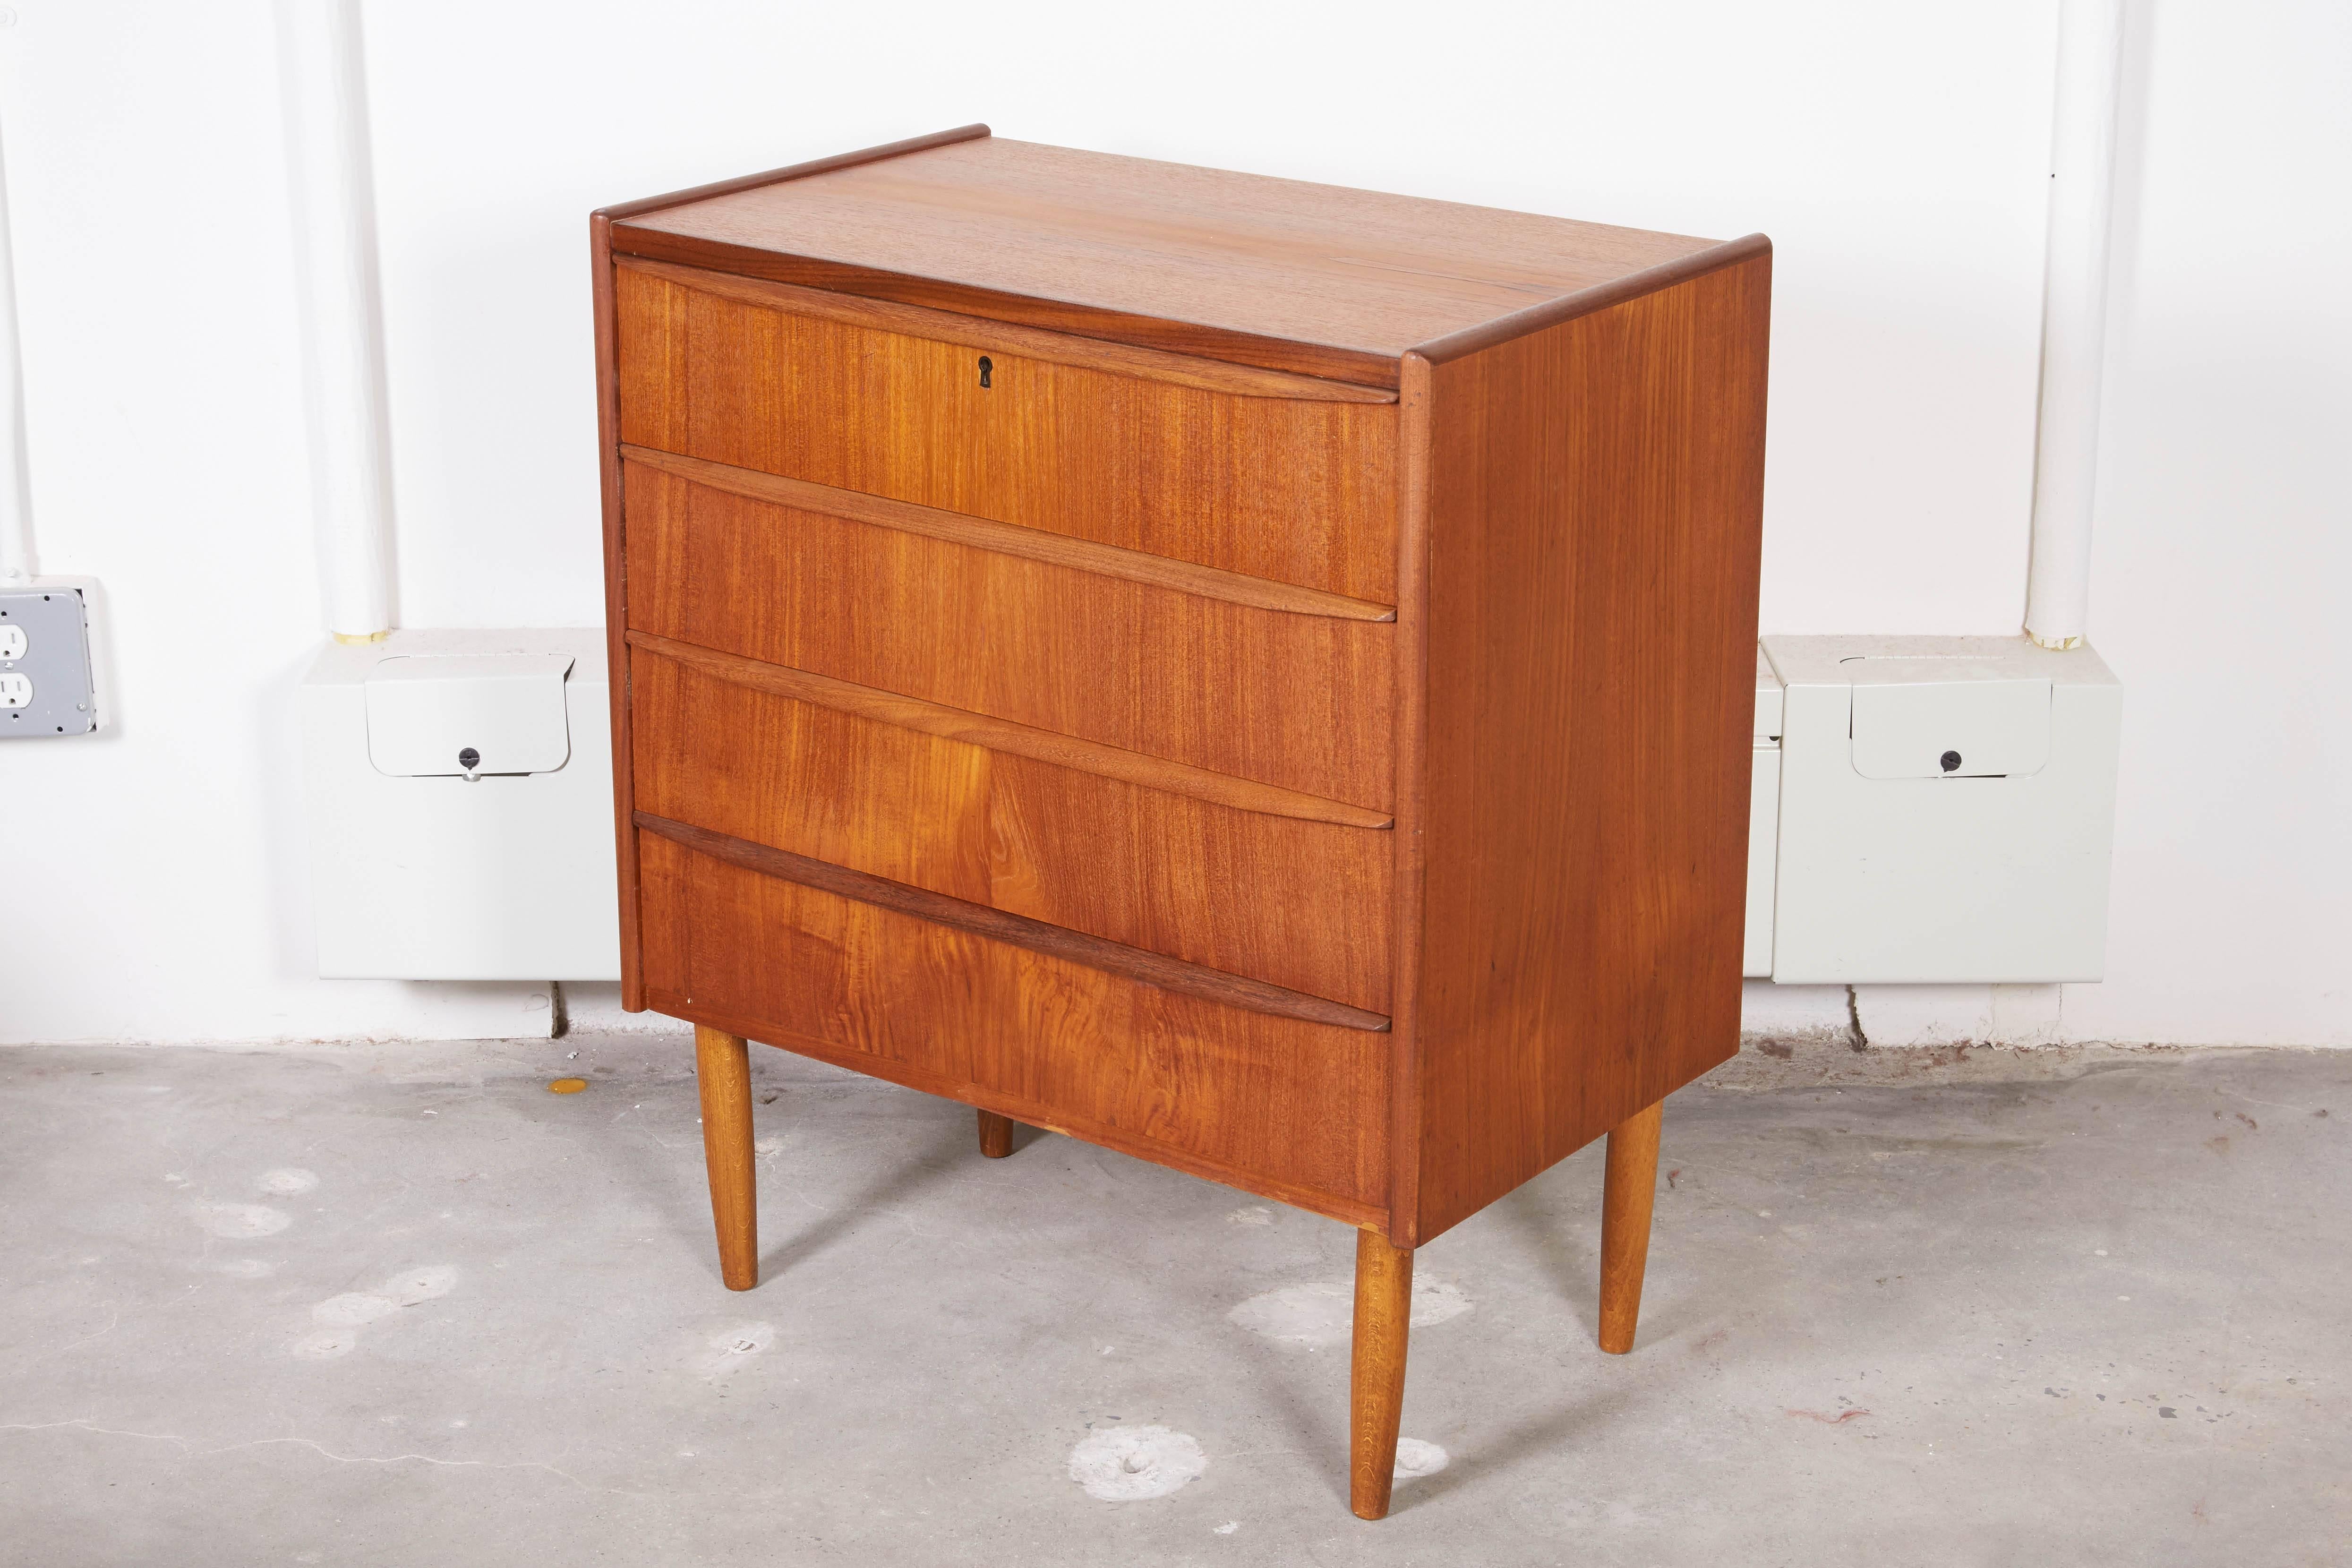 Vintage 1960s Teak Dresser

This Danish 4-drawer dresser is in excellent condition and can be in many parts of the home and office. A great piece in a bedroom as a dresser or large night stand or as a piece in the entry way. Maybe in the hallway for